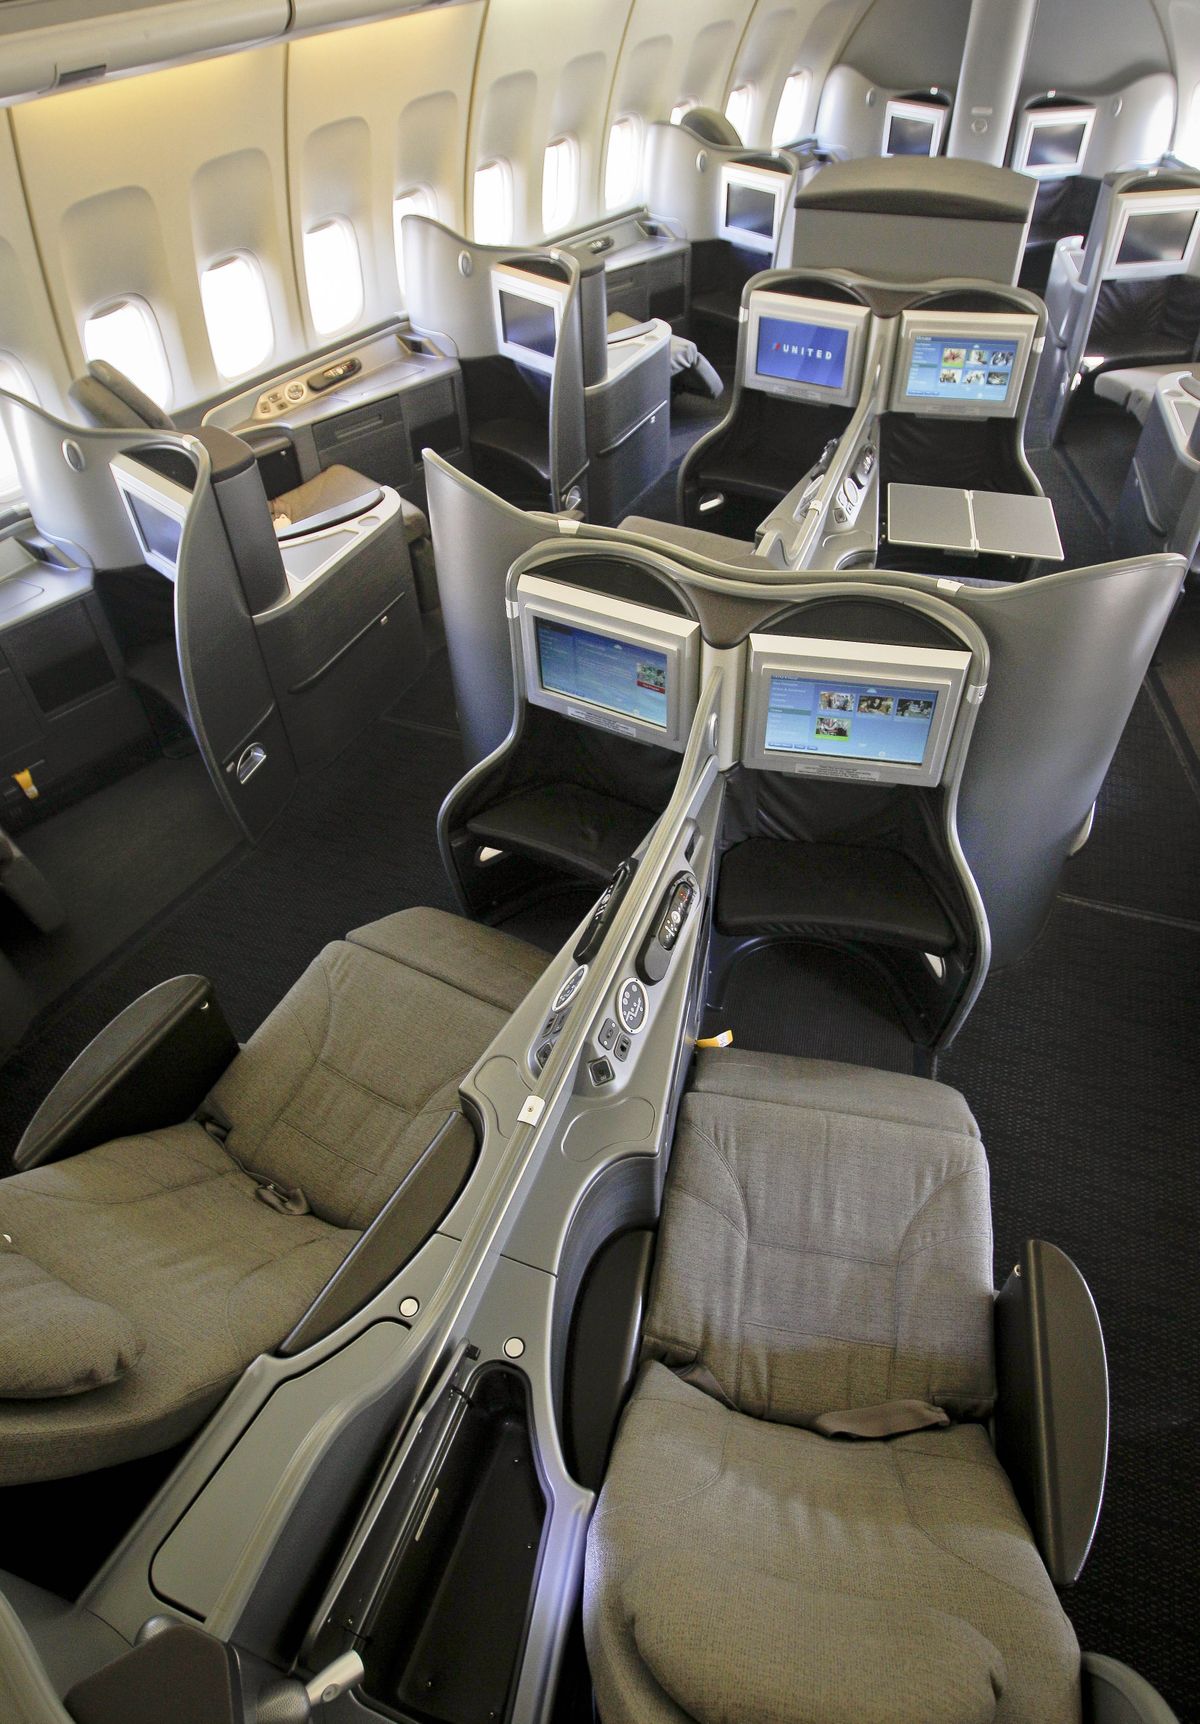 Upgrades have added a taste of luxury to the first-class interior section of a United Airlines 747 at San Francisco International Airport. (Associated Press)